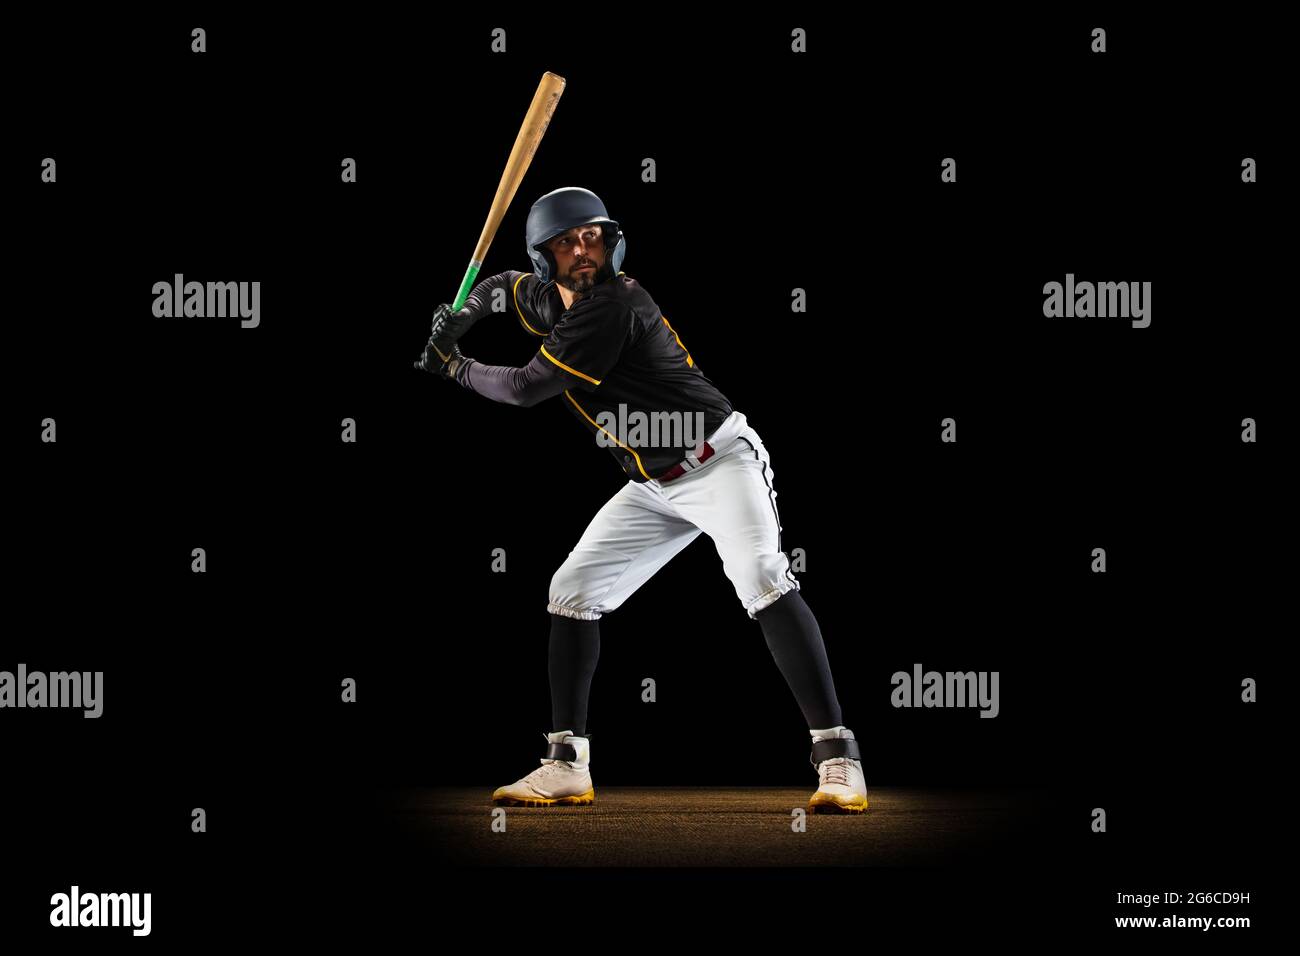 Professional baseball player, pitcher in sports uniform and equipment practicing isolated on a black studio background. Team sport concept Stock Photo